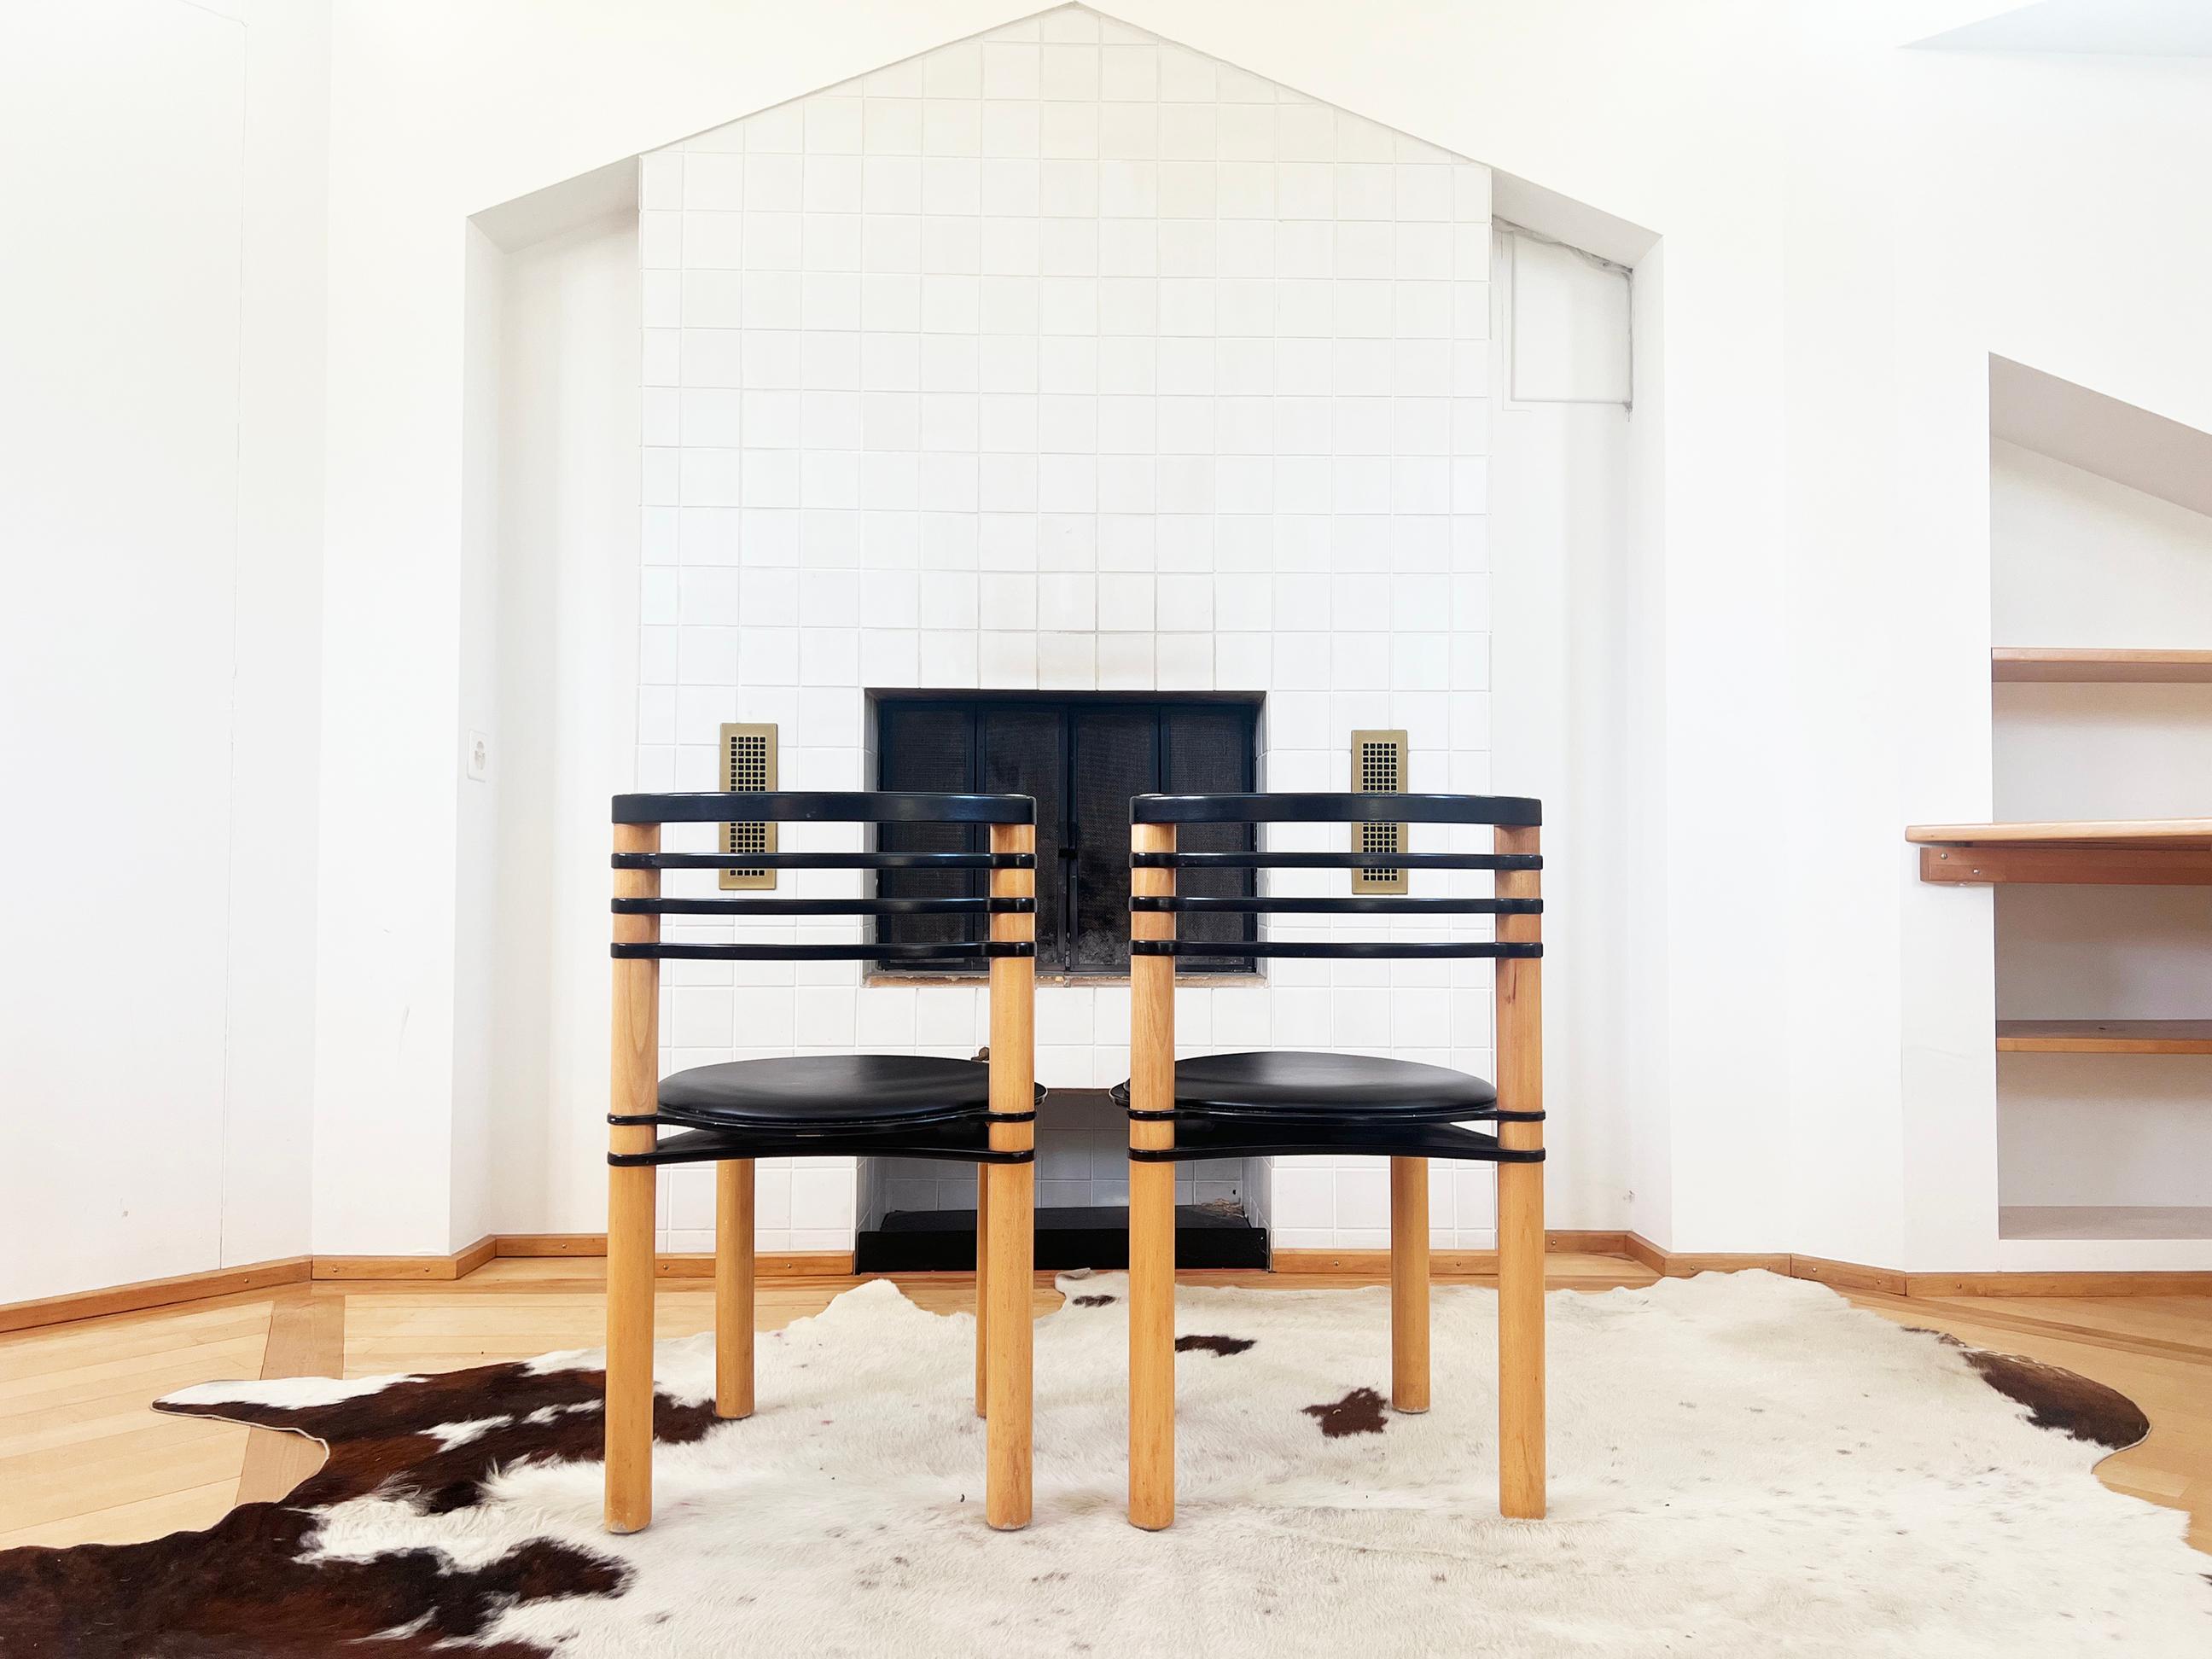 Set of 4 Postmodern Black and Wood Chairs by Kurt Thut for Dietiker, 1980s For Sale 2